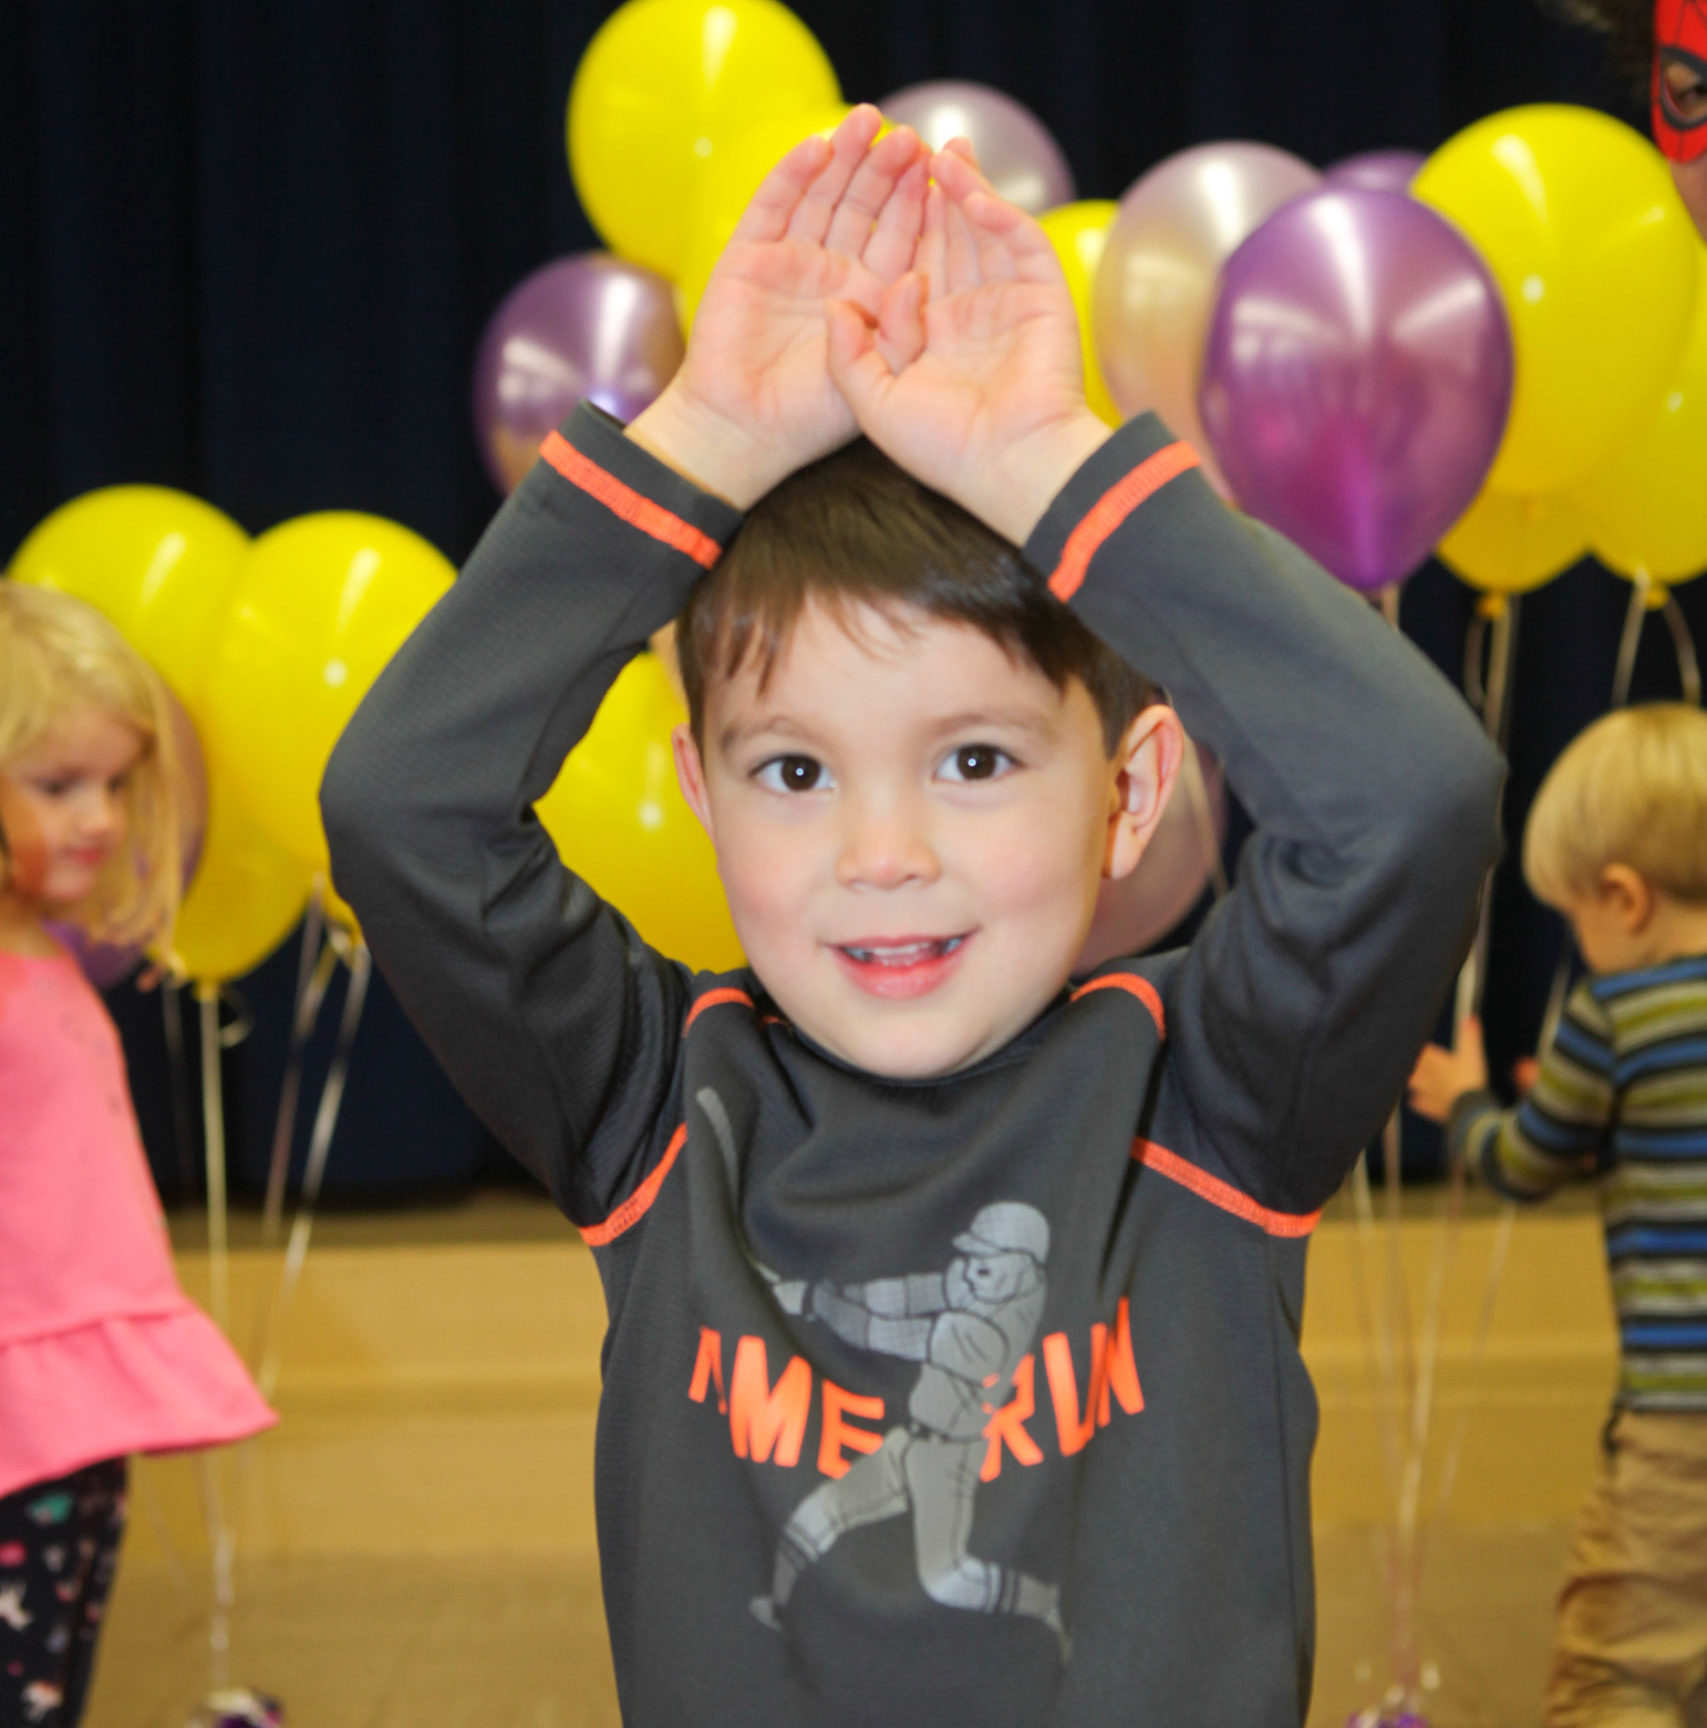 Our children's dance parties are great fun!